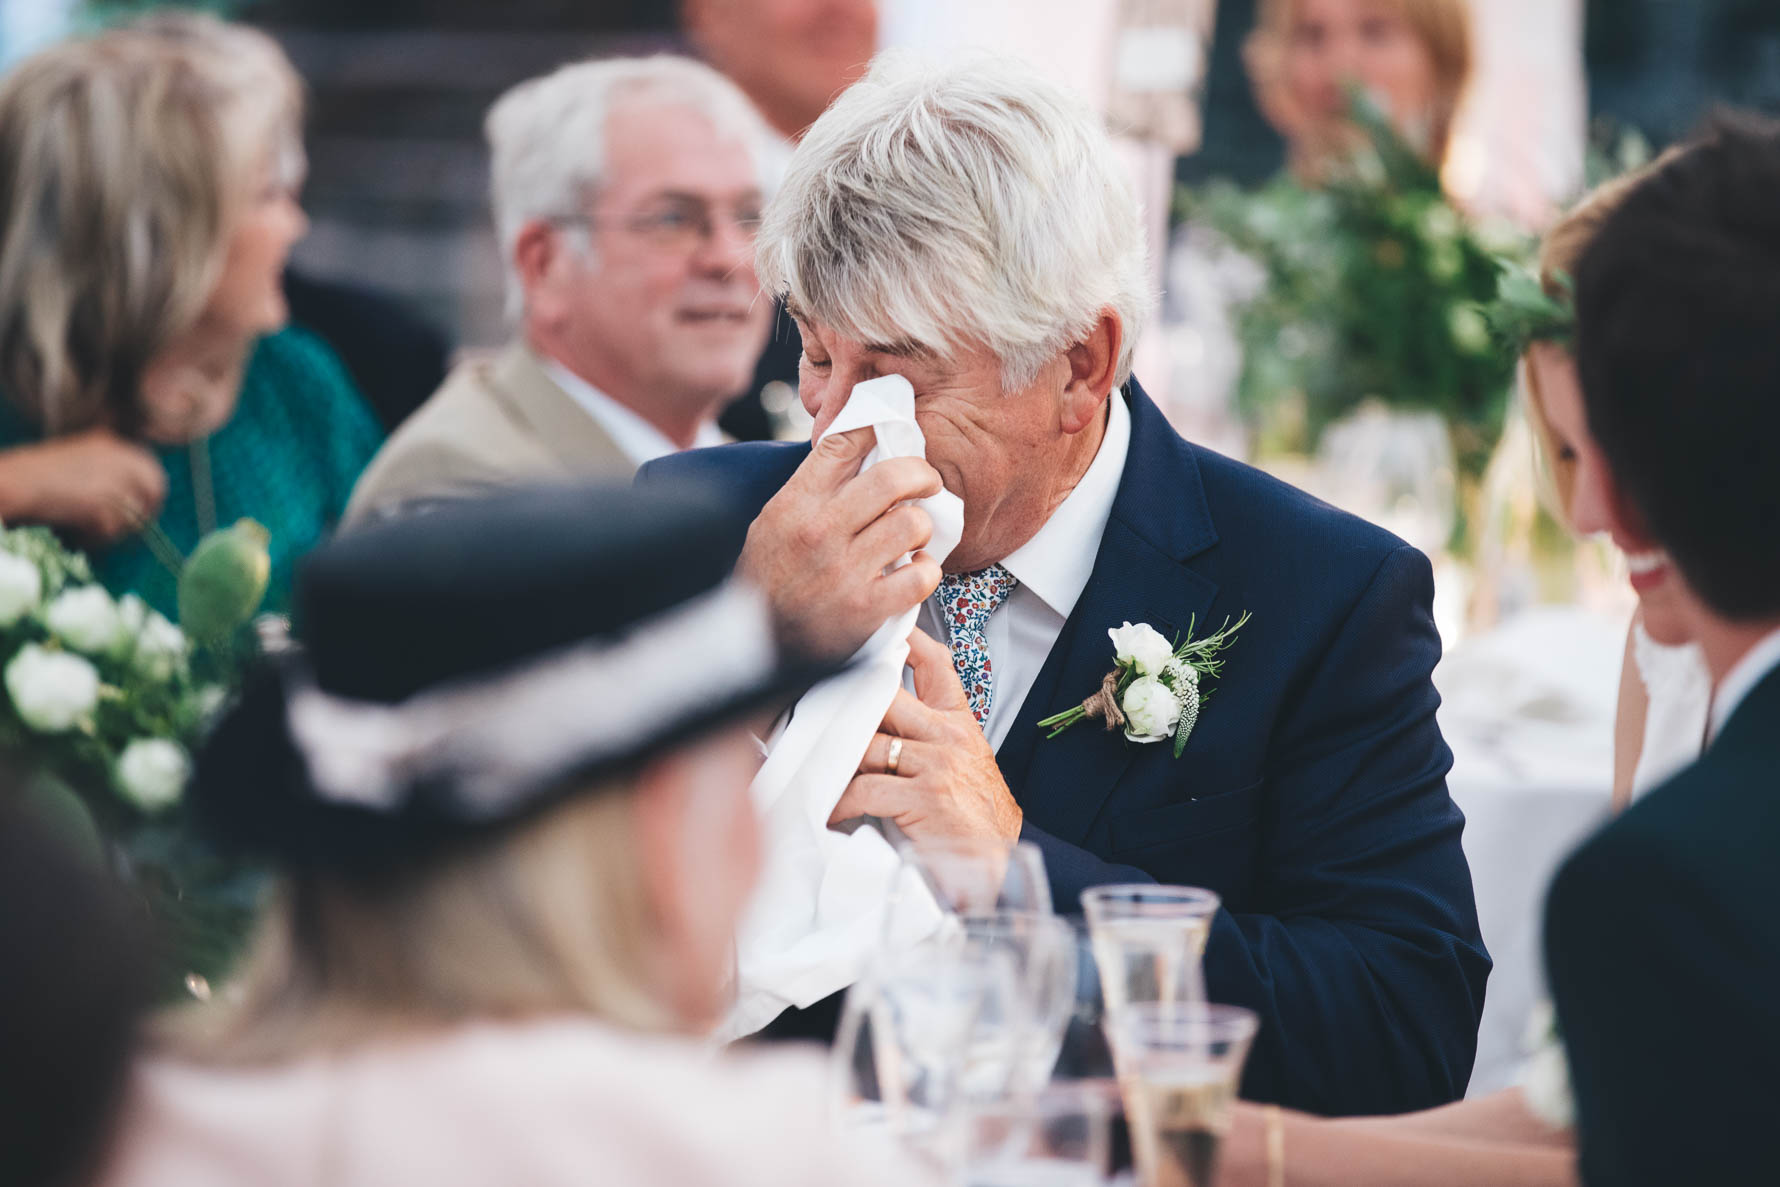 Father of the bride wiping a tear away from his eye with a napkin during the speeches at a wedding.